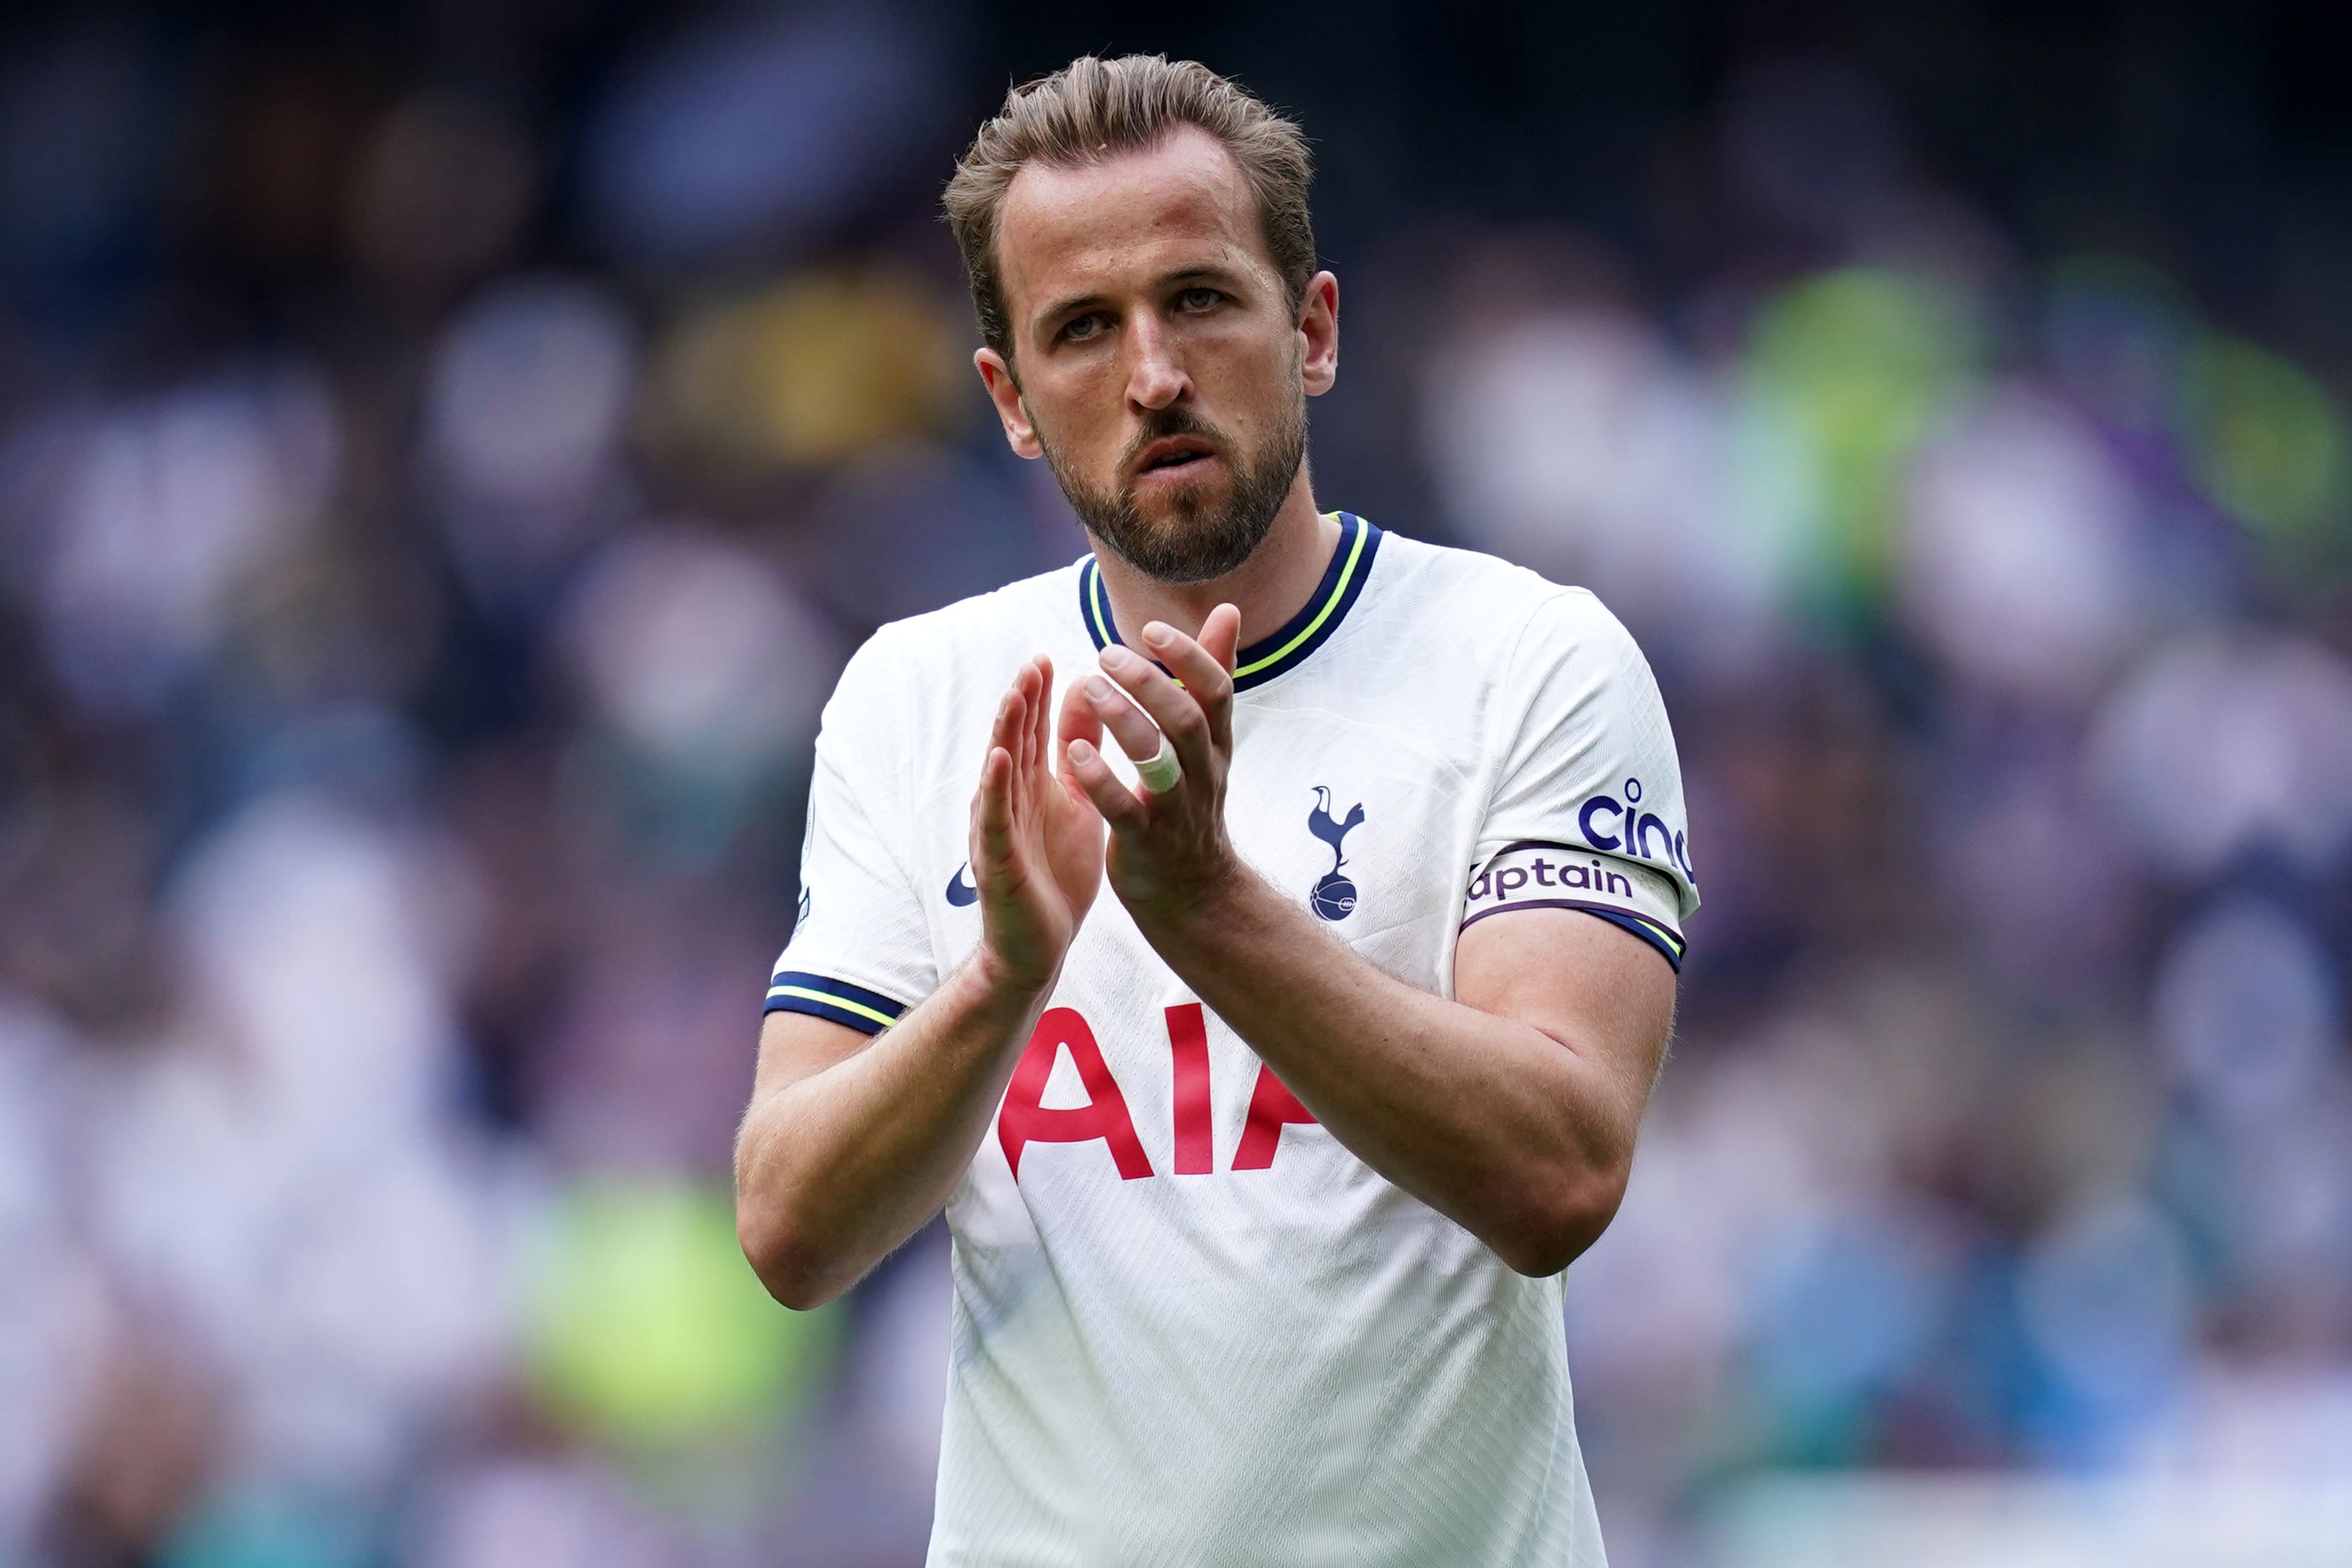  Harry Kane, the captain of Tottenham Hotspur, applauds the crowd during a match at Tottenham Hotspur Stadium in London.